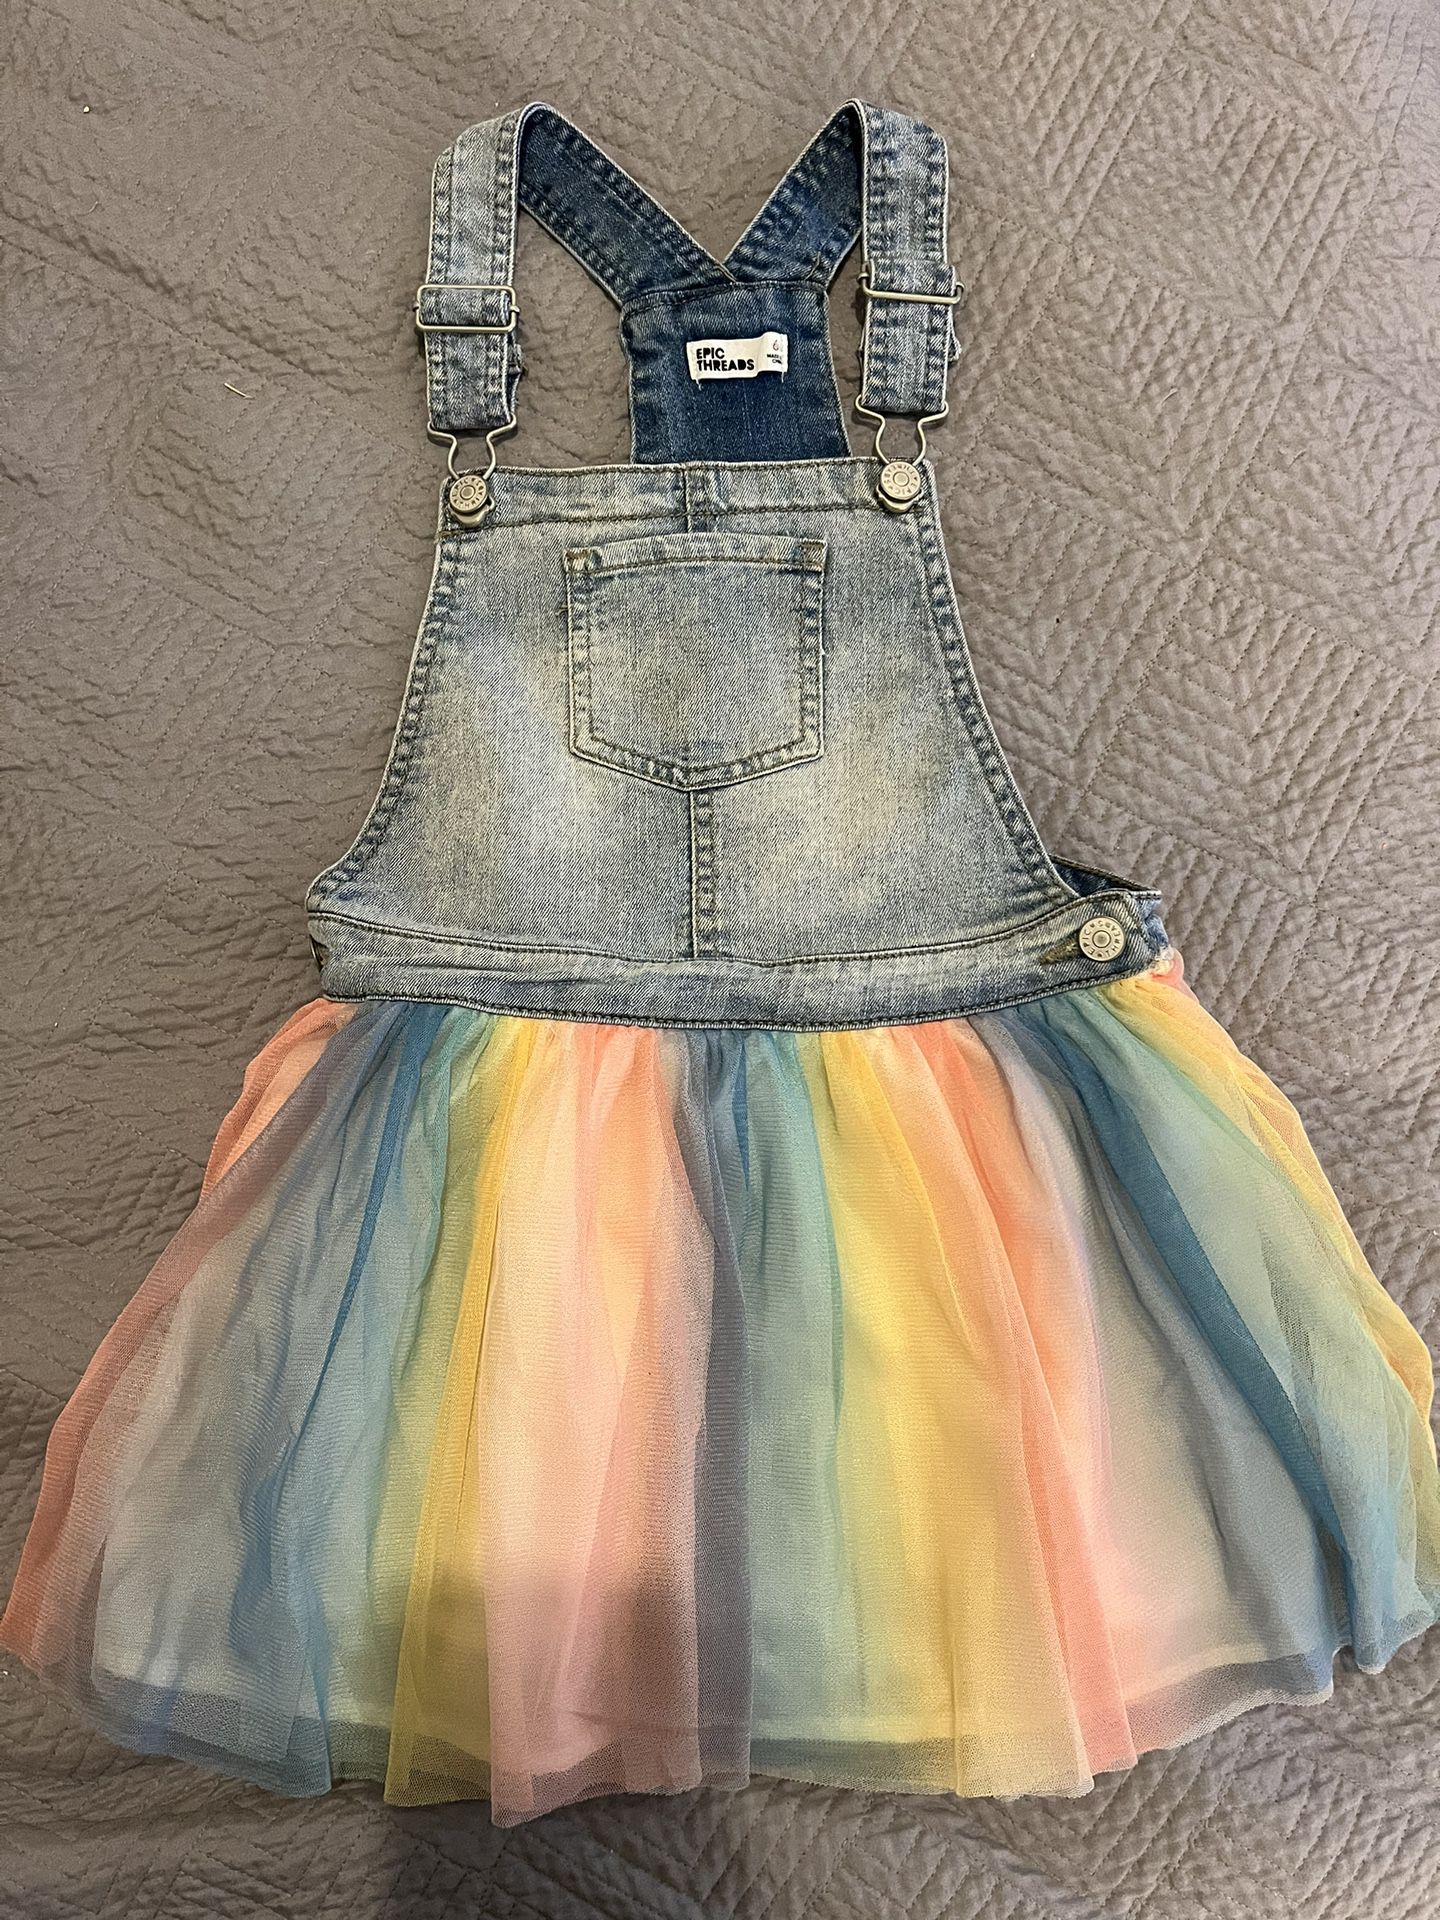 Kids Rainbow Tulle And Denim Overall Skirt Size 6